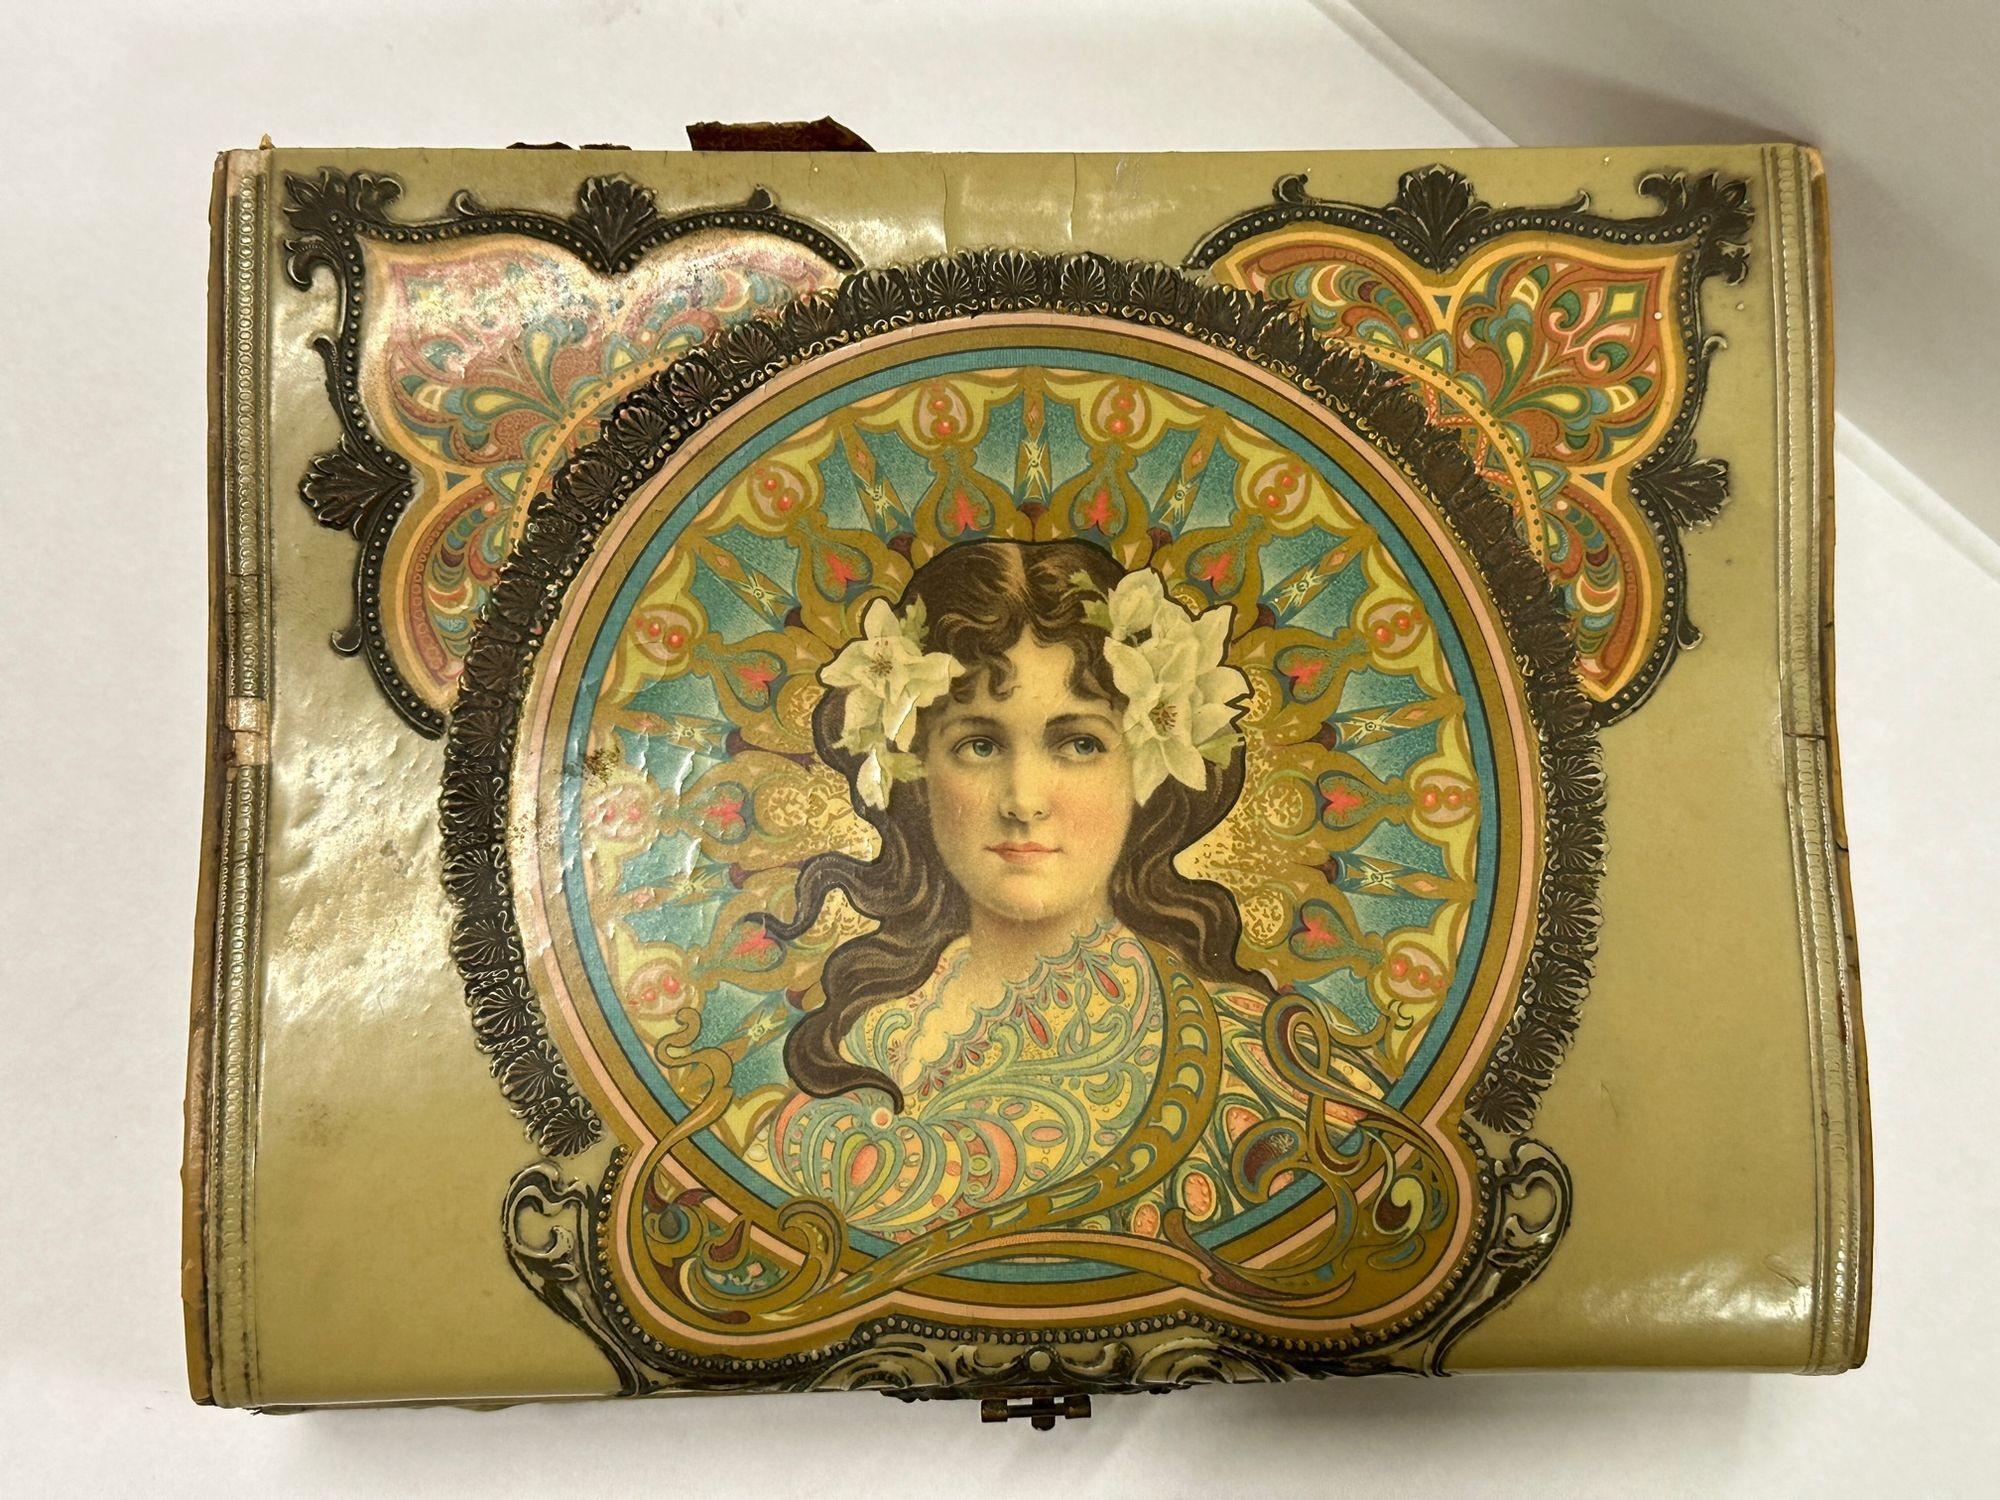 American Art Nouveau Satin Lined Jewelry Box with/ Portrait on Cover For Sale